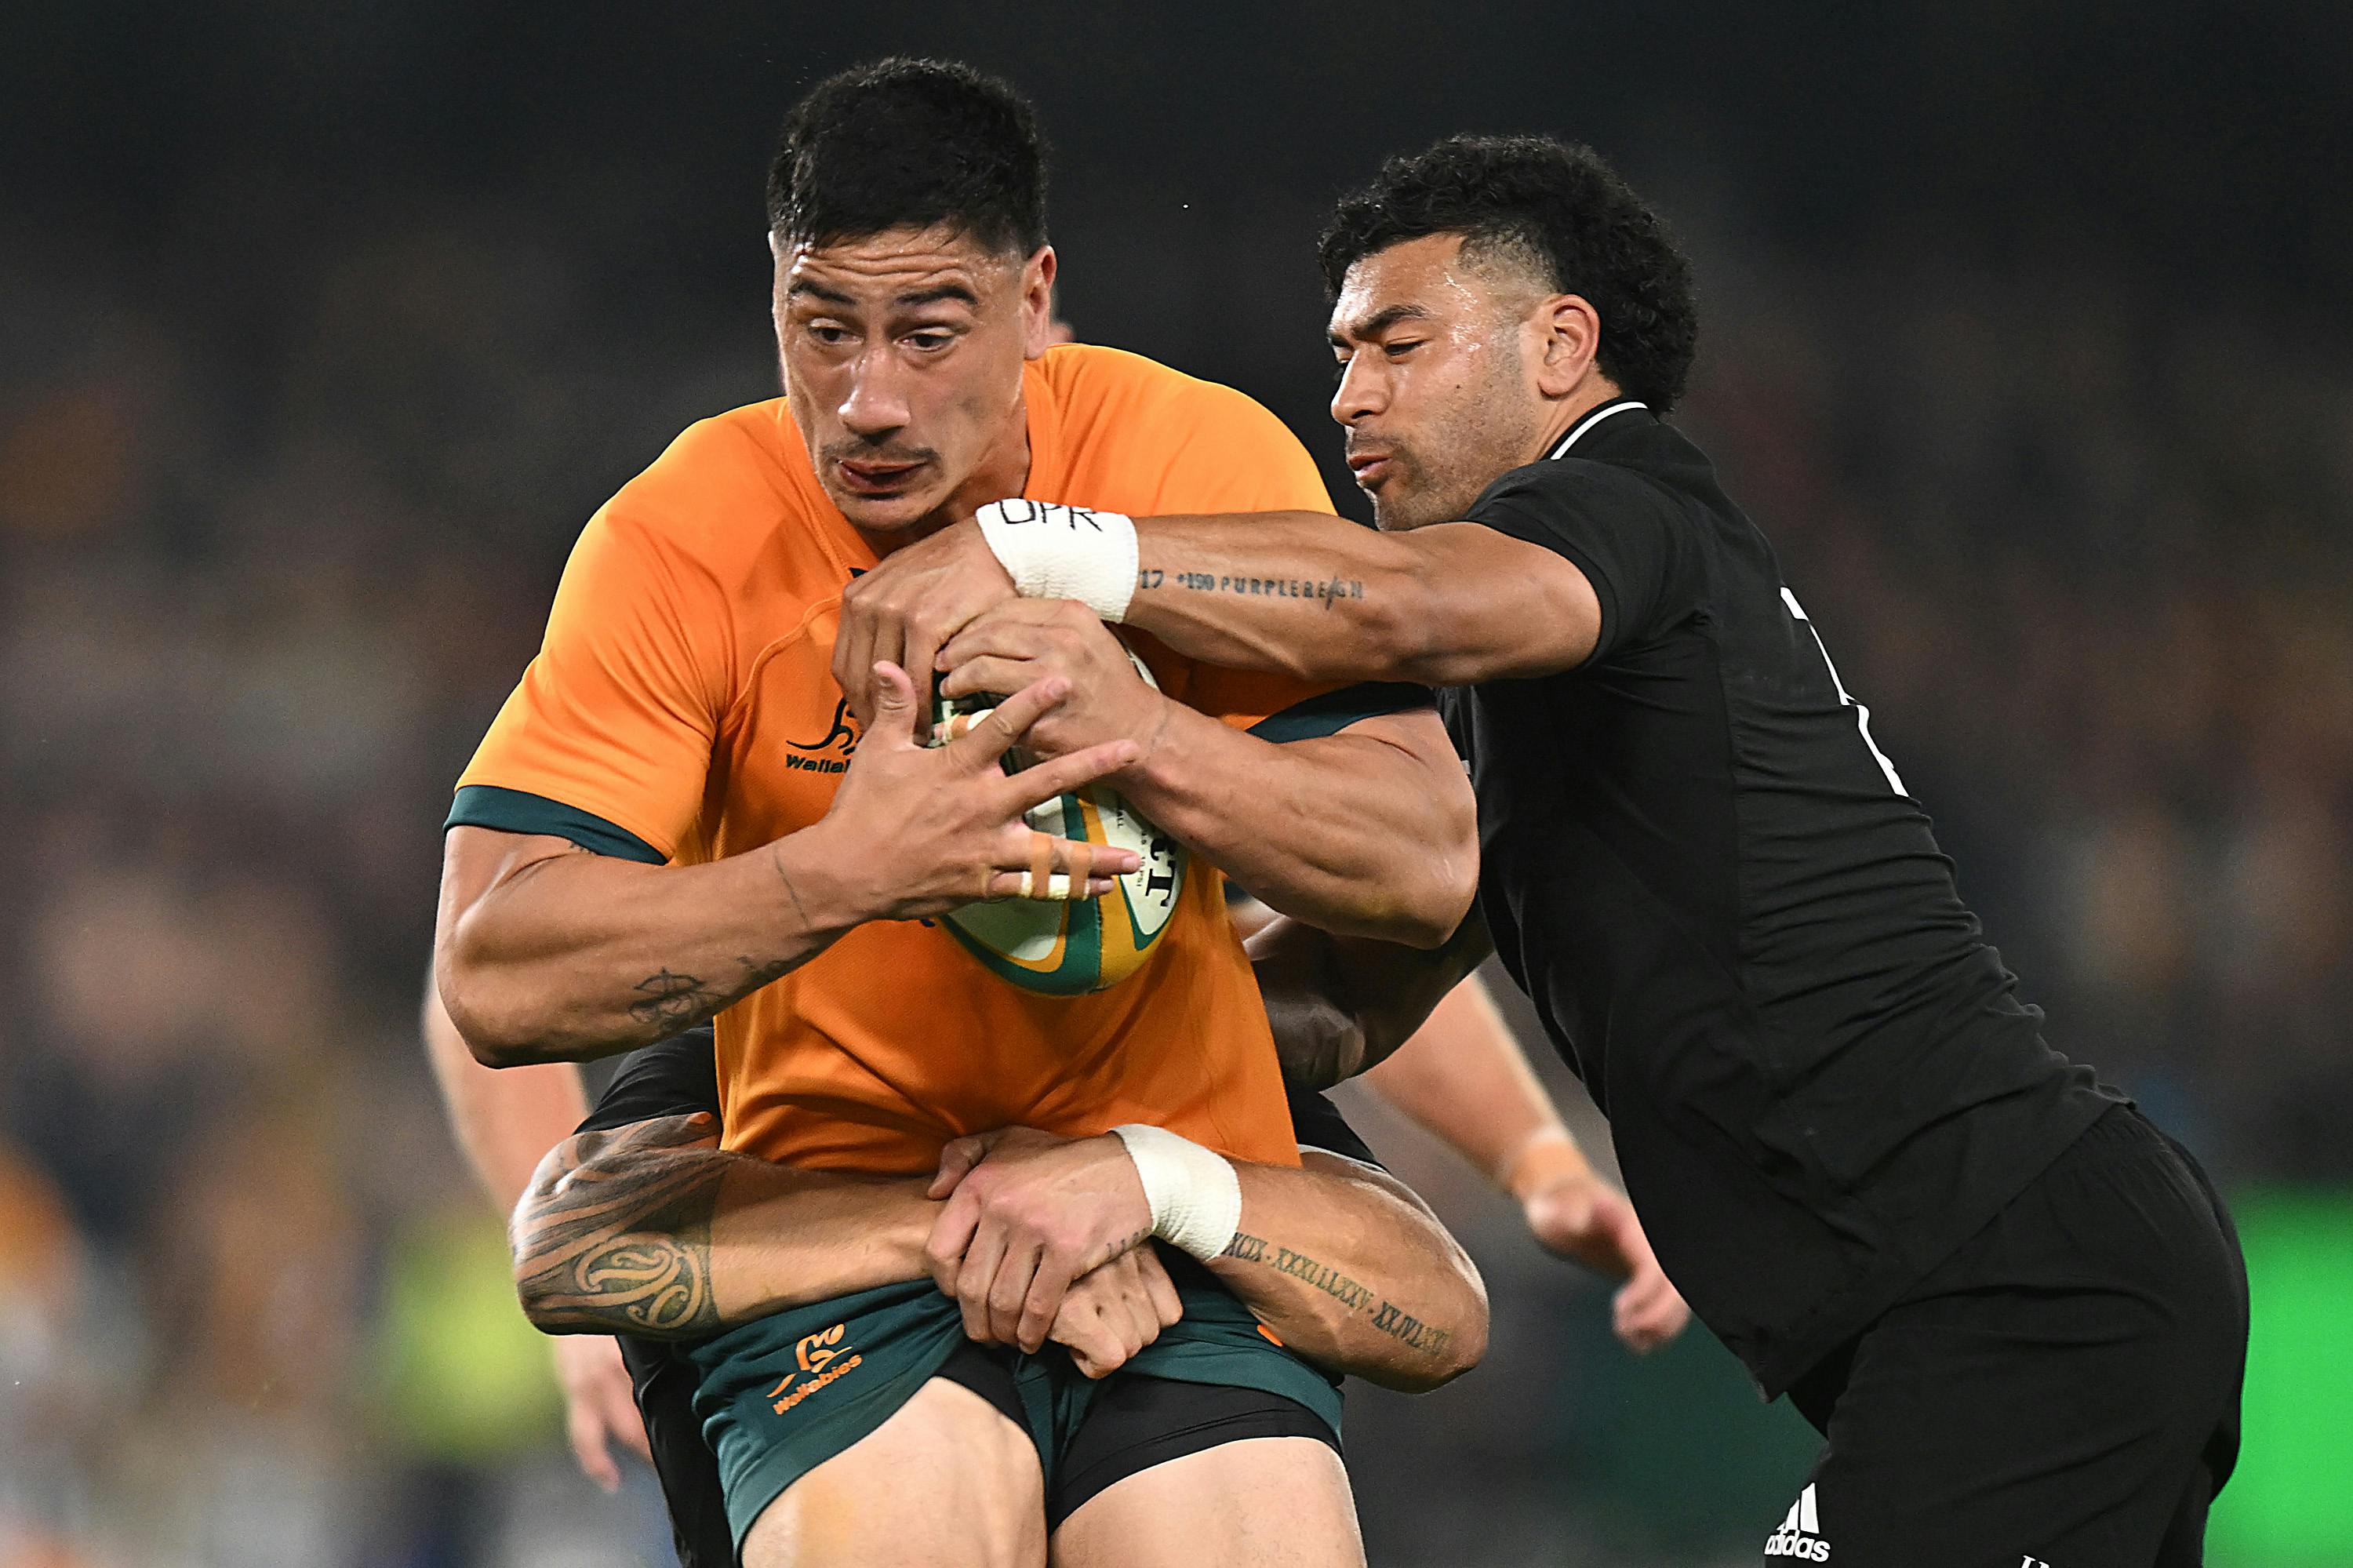 Lalakai Foketi tries to break through a tackle in the 2022 Bledisloe Cup series. Photo: Getty Images